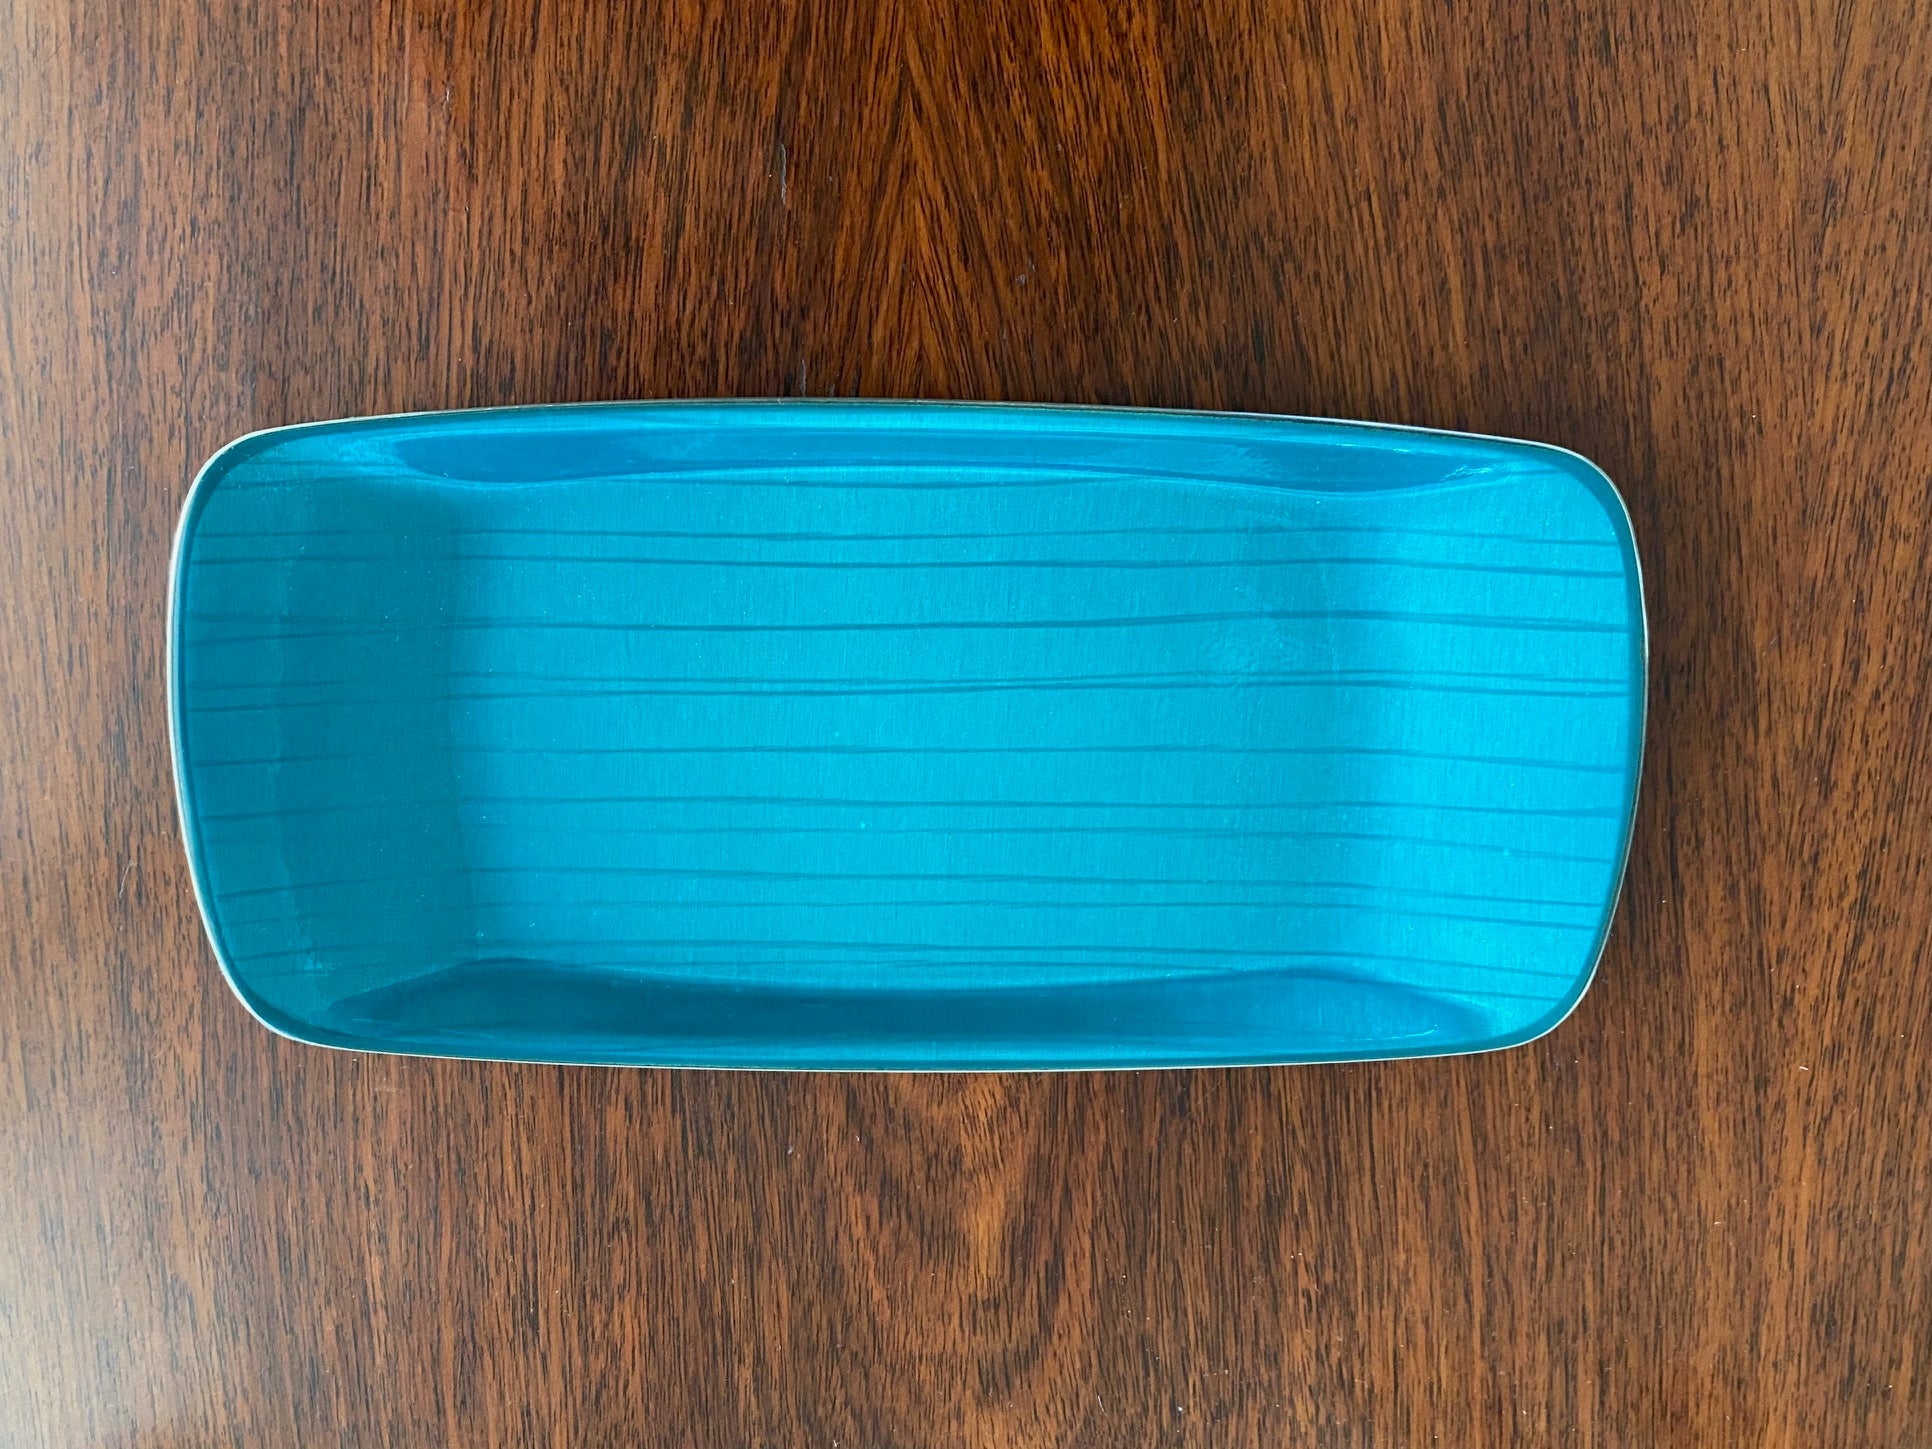 Cathrineholm blue enamel rectangular dish by Grete Prytz Kittelsen. Engraved on reverse "With the compliments of Knutsen Line". Made in Norway-Cook Street Vintage